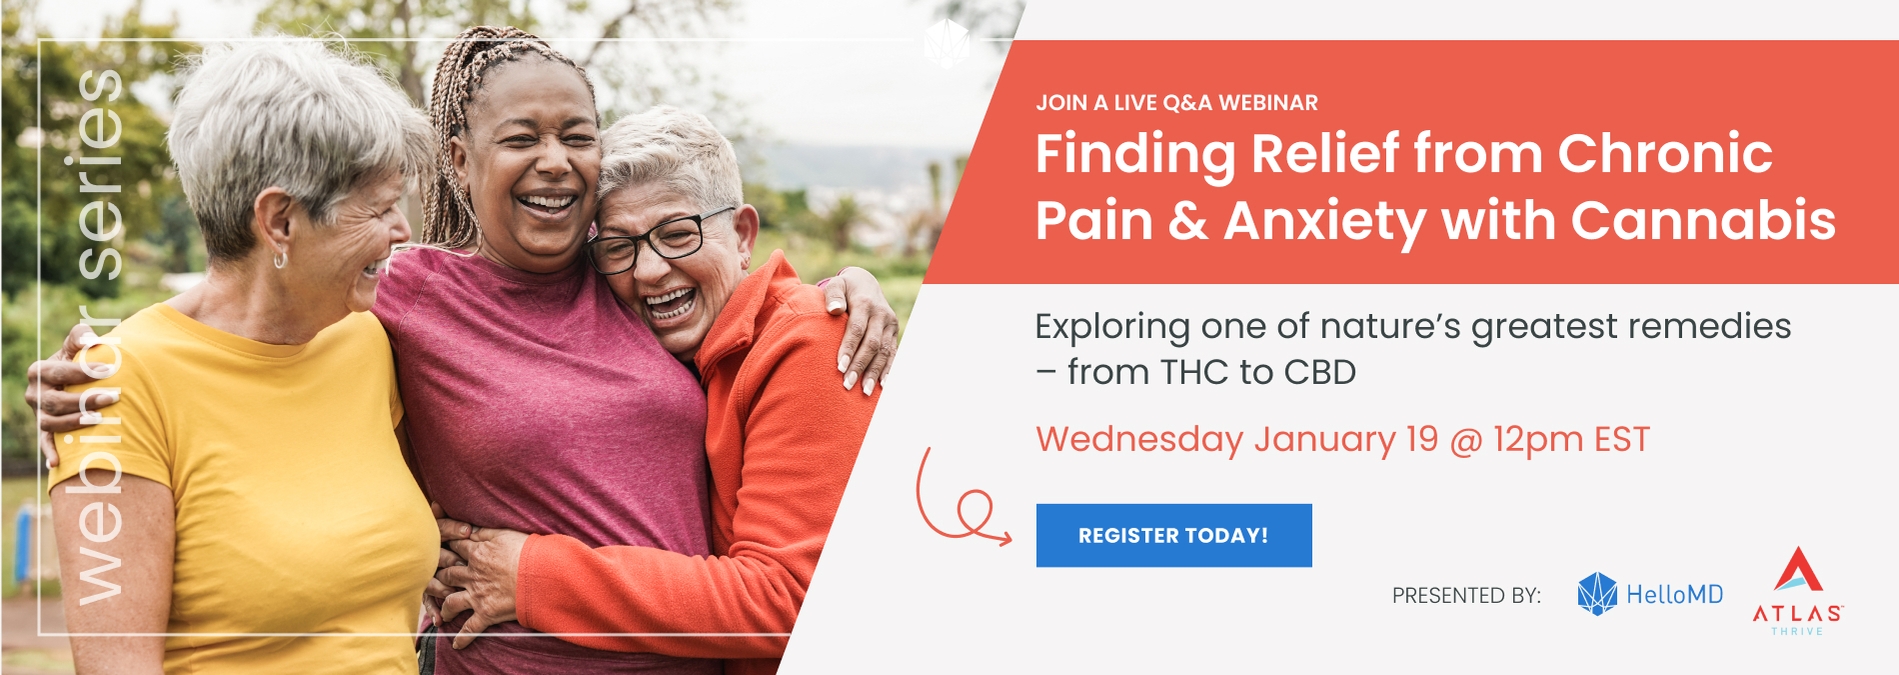 QUESTIONS ABOUT CANNABIS? JOIN A LIVE Q&A WITH OUR HEALTHCARE EXPERTS. Get answers on pain, sleep, anxiety and product dosing throughotu the week of September 27th.